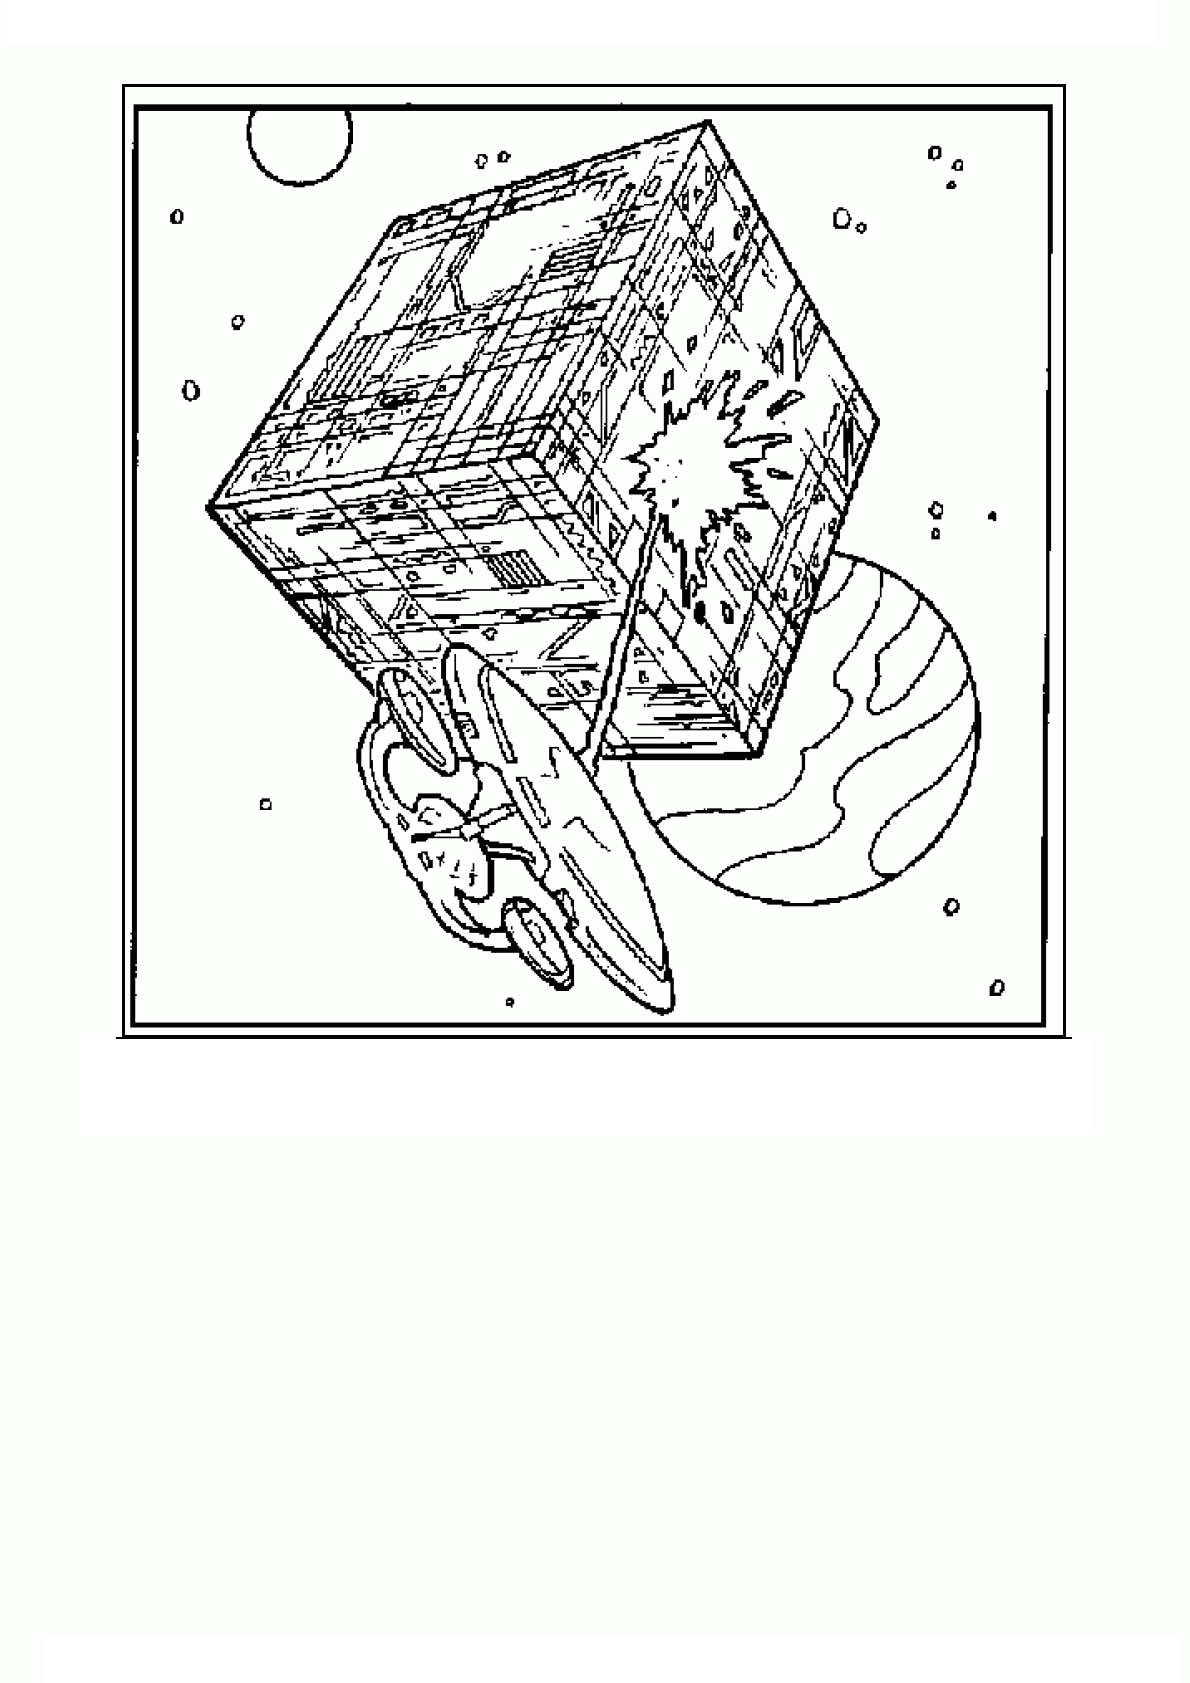 Star Trek Coloring Pages Coloringpages1001